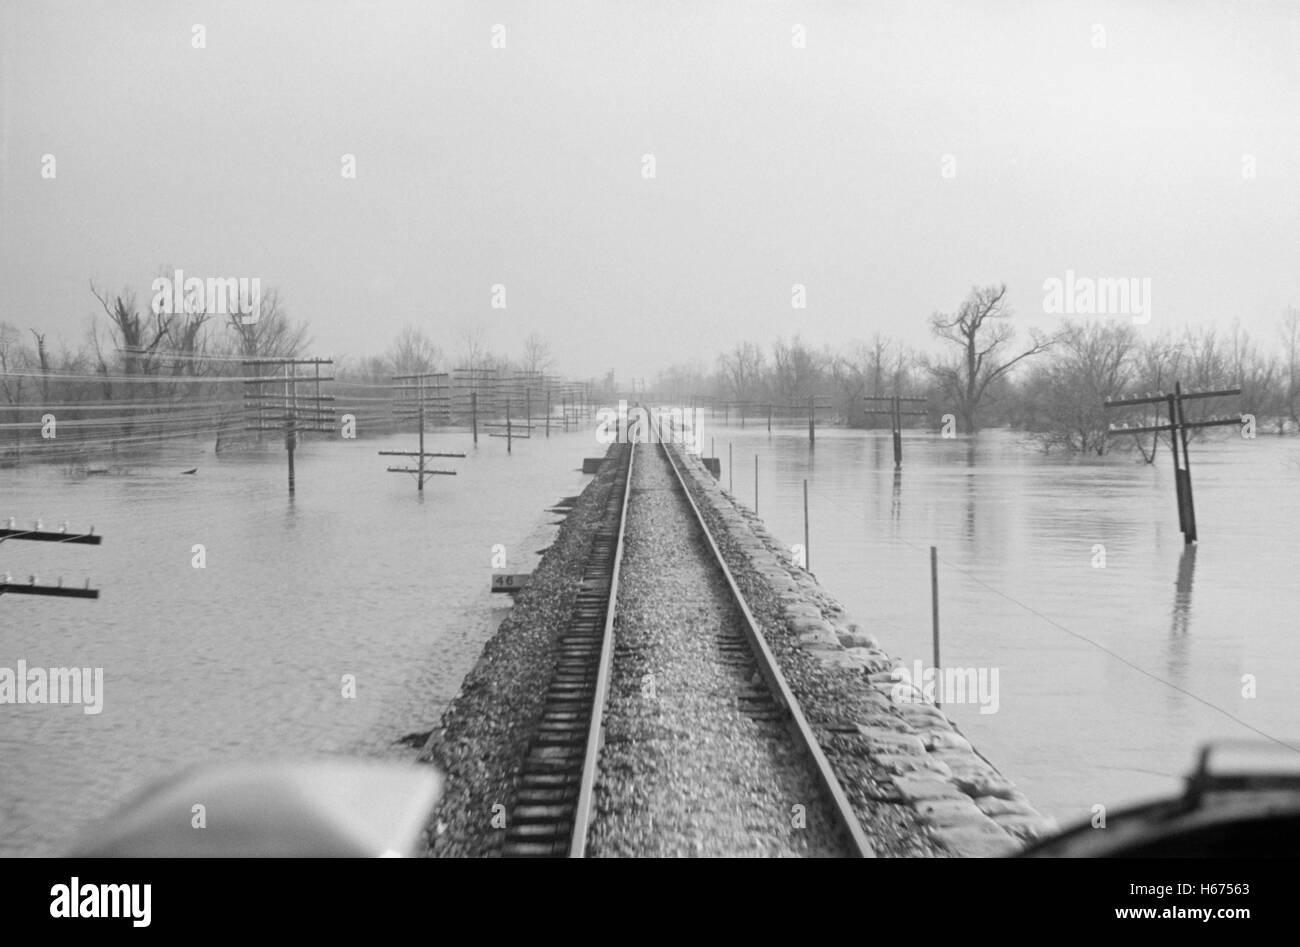 View of Railroad Tracks during Flood, Tennessee, USA, Edwin Locke for Farm Security Administration, February 1937 Stock Photo